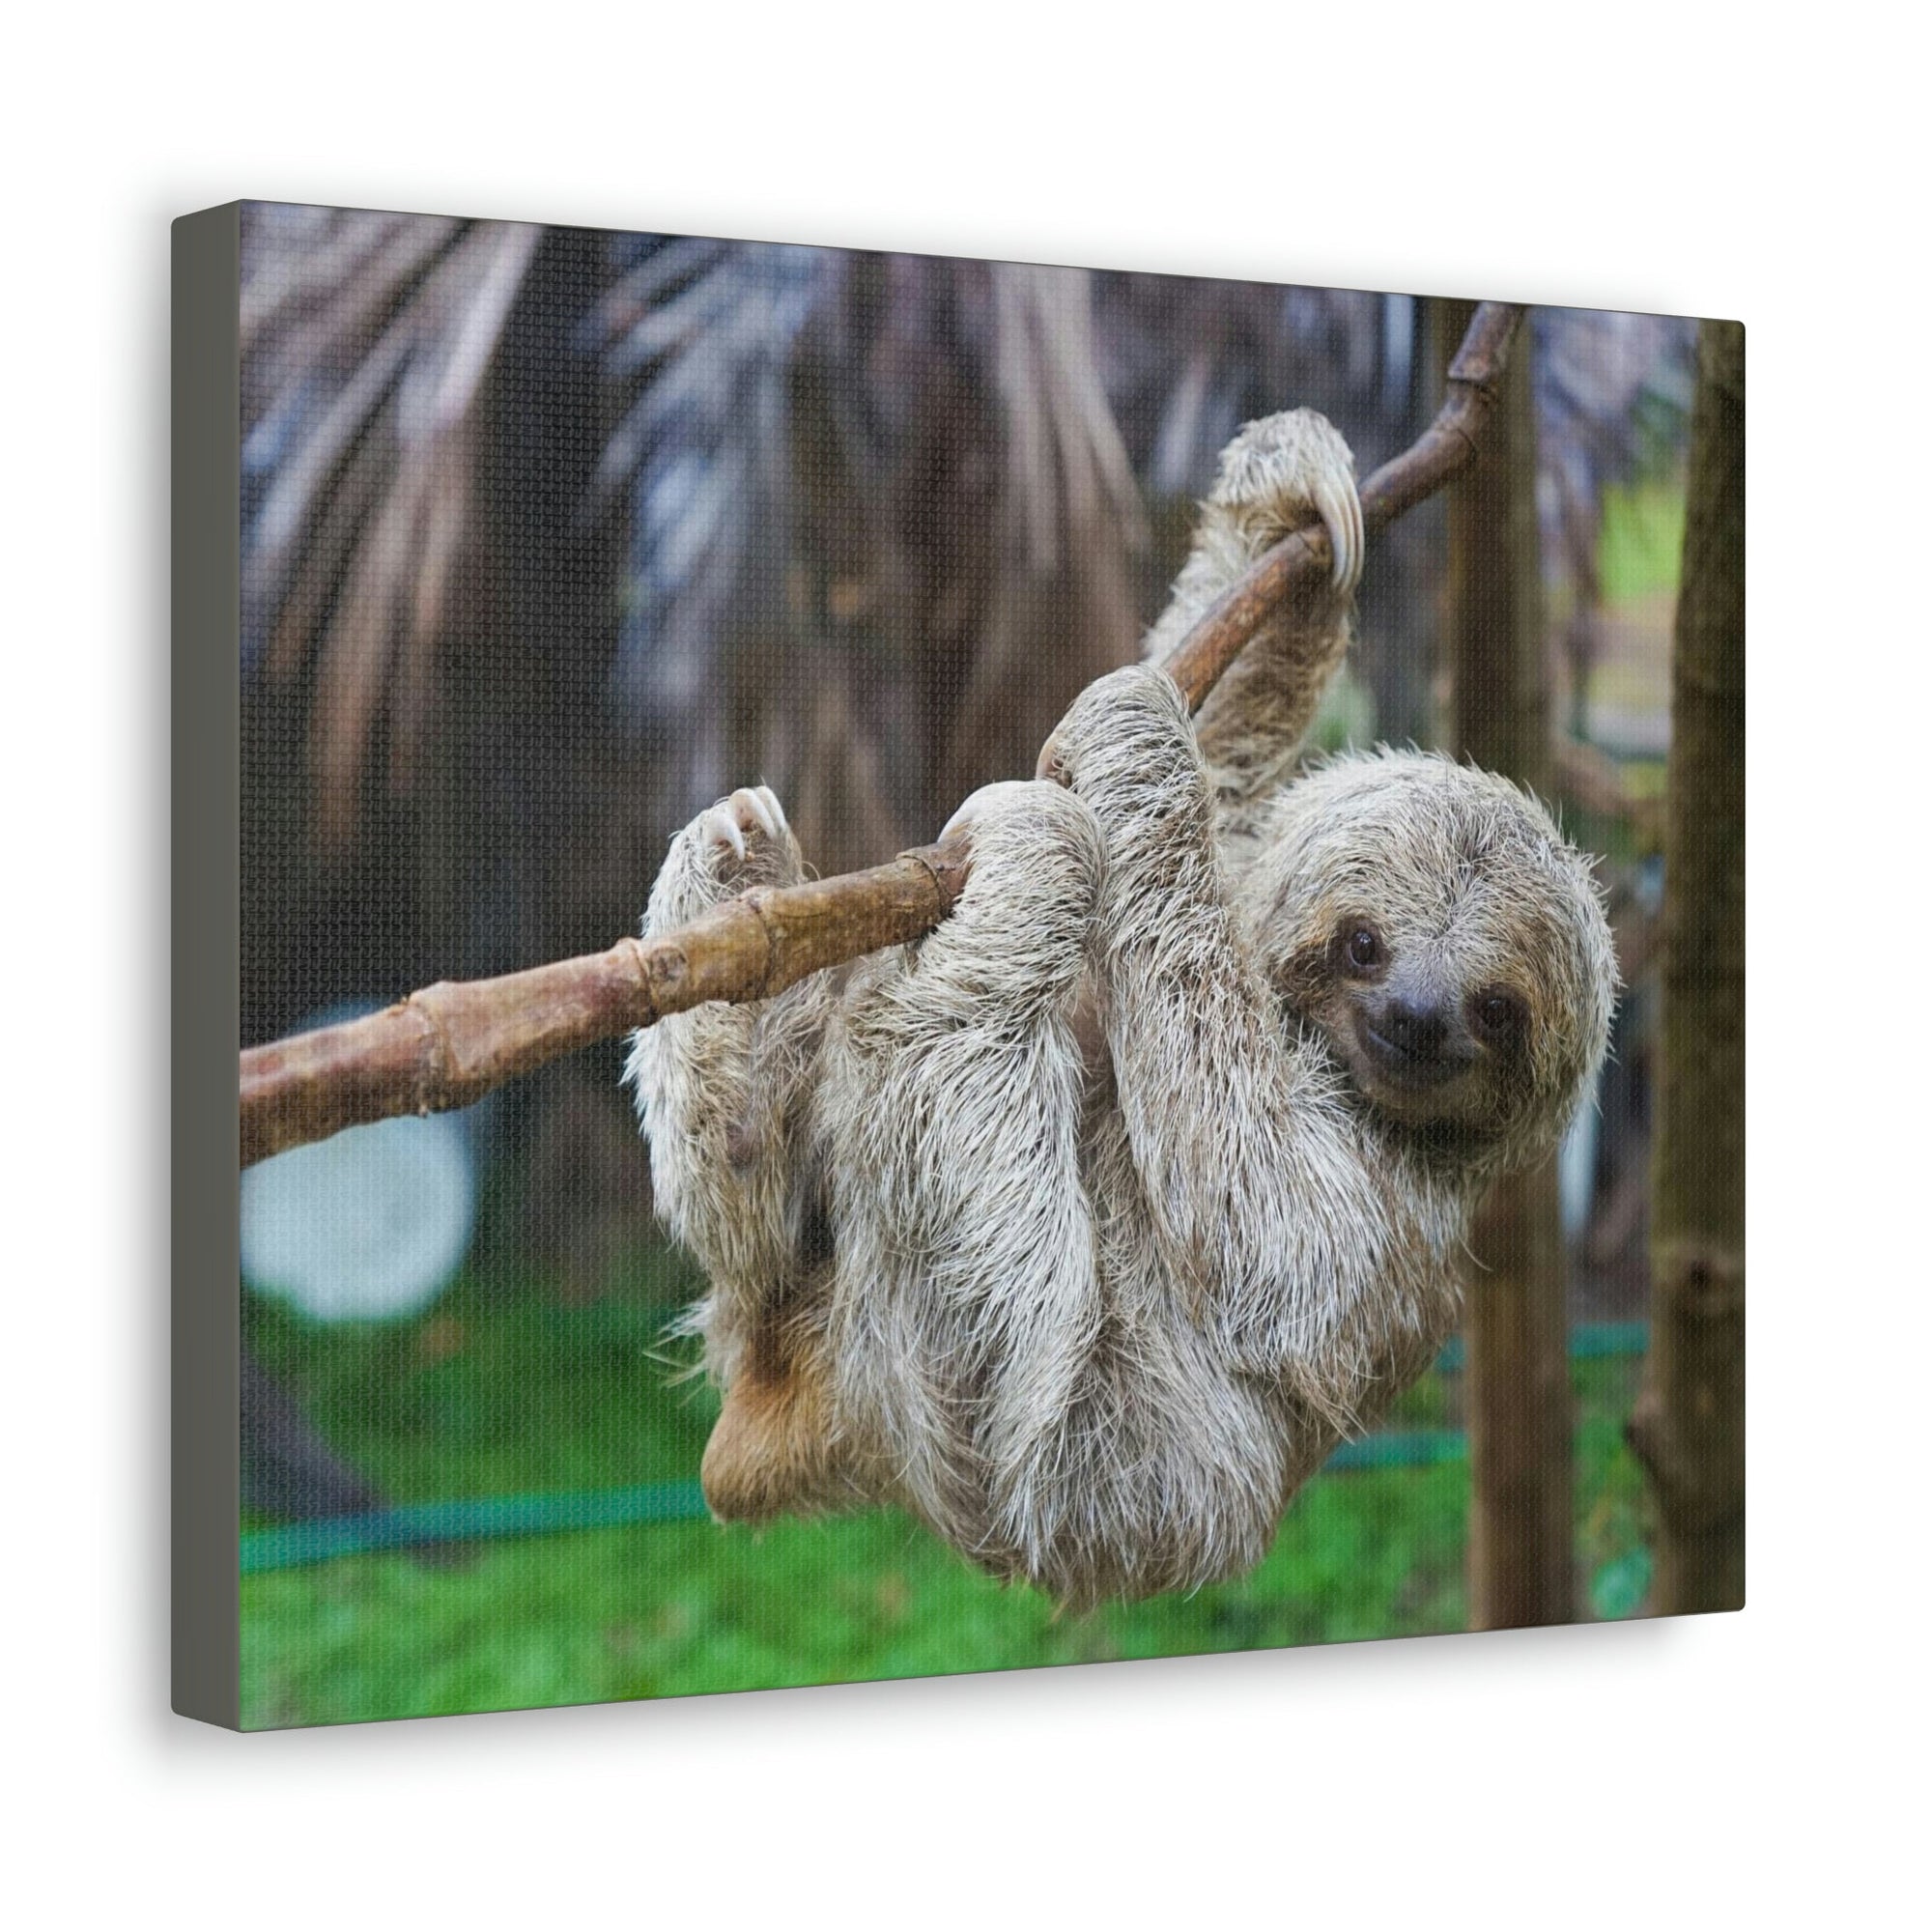 Scripture Walls Majestic Sloth Art Majestic Sloth Print Animal Wall Art Wildlife Canvas Prints Wall Art Ready to Hang Unframed-Express Your Love Gifts